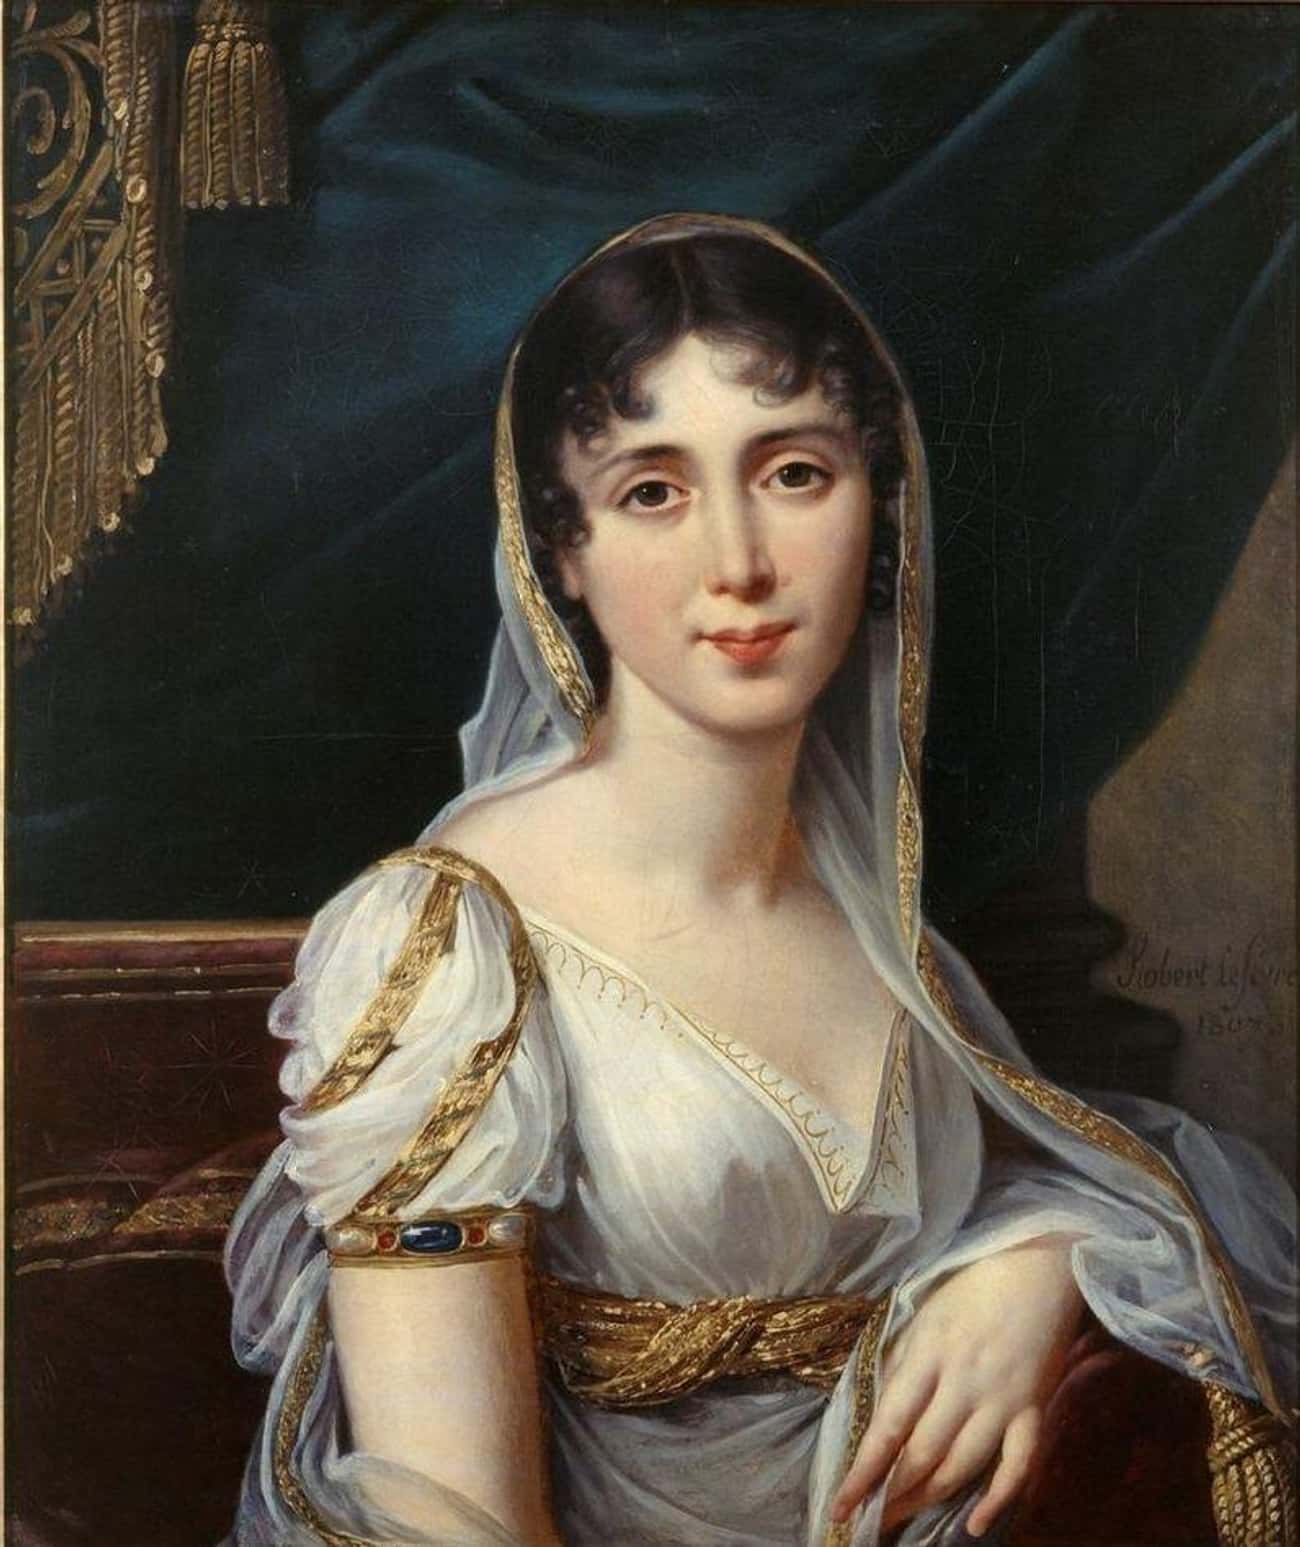 His Wife Was Nearly Napoleon's Wife